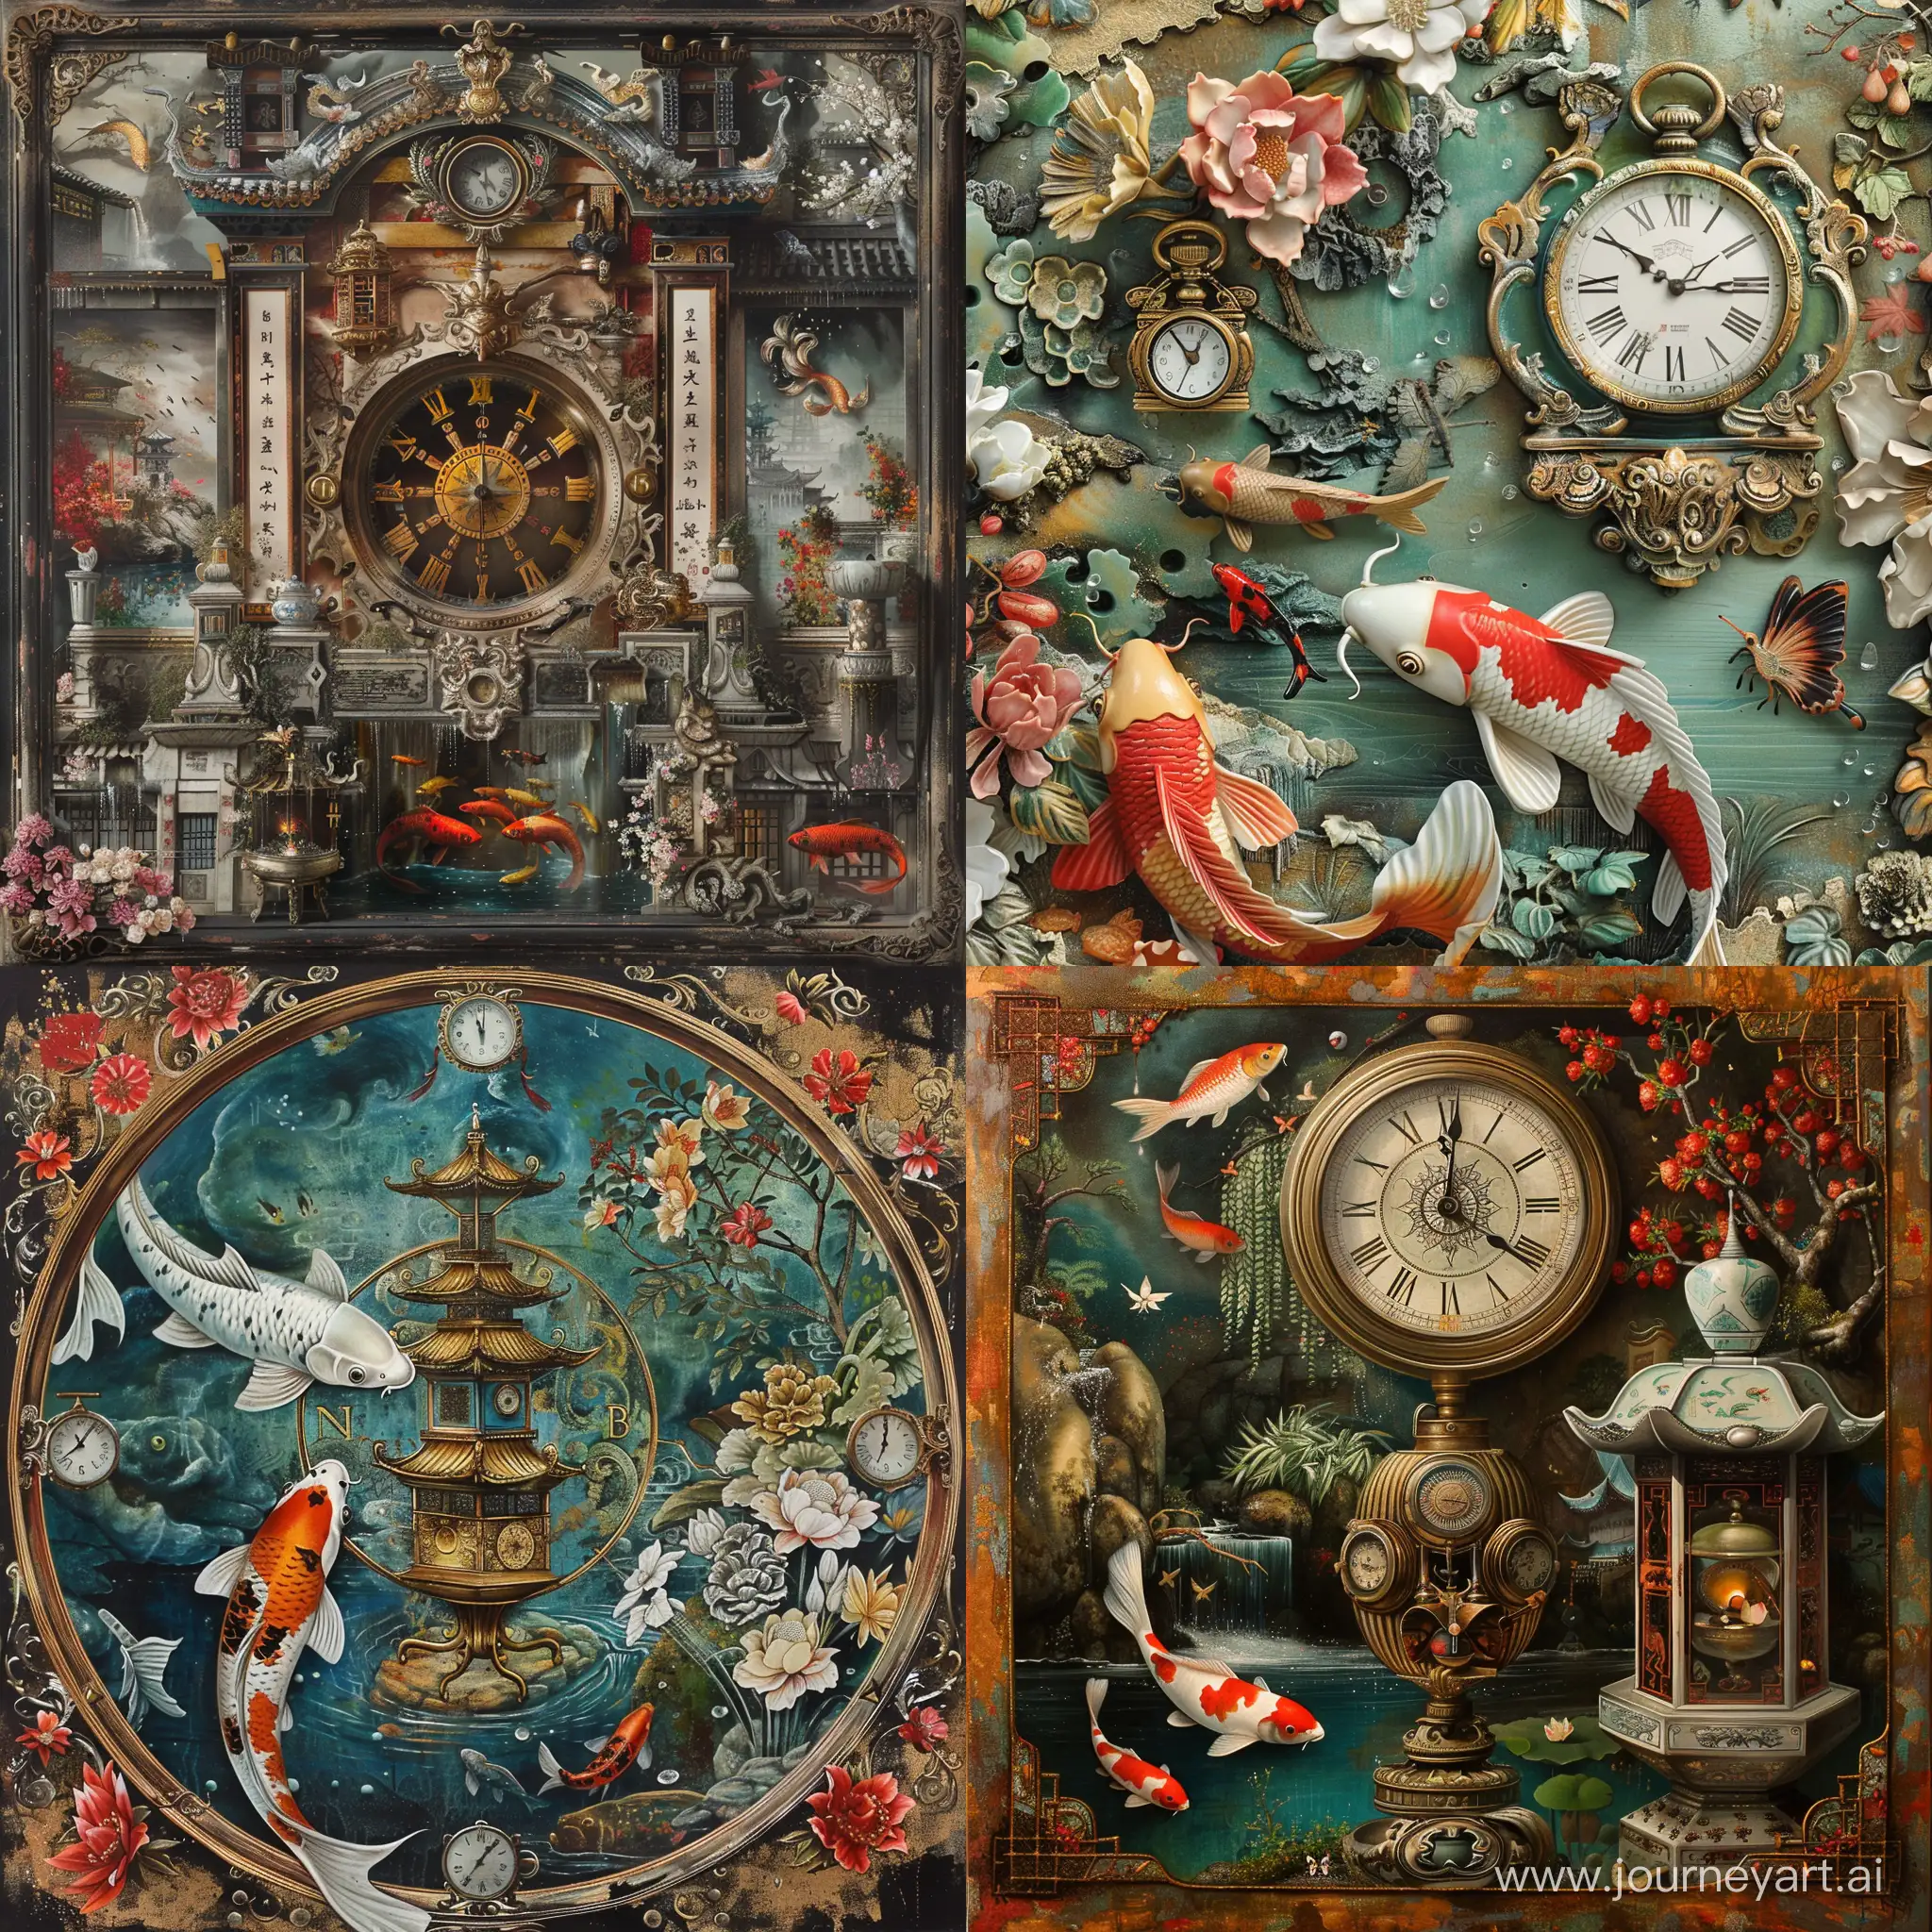 **elegantism, insane detail, painting masterpiece ,Extreme authentic decor , pocket watch, steampunk, compass, lantern, porcelain, koi ponds , perfect exact rendering, embellished and intricate architectural ornamentations, many china and japan artifacts, greebles::2 -- ar 16:9 --q 1